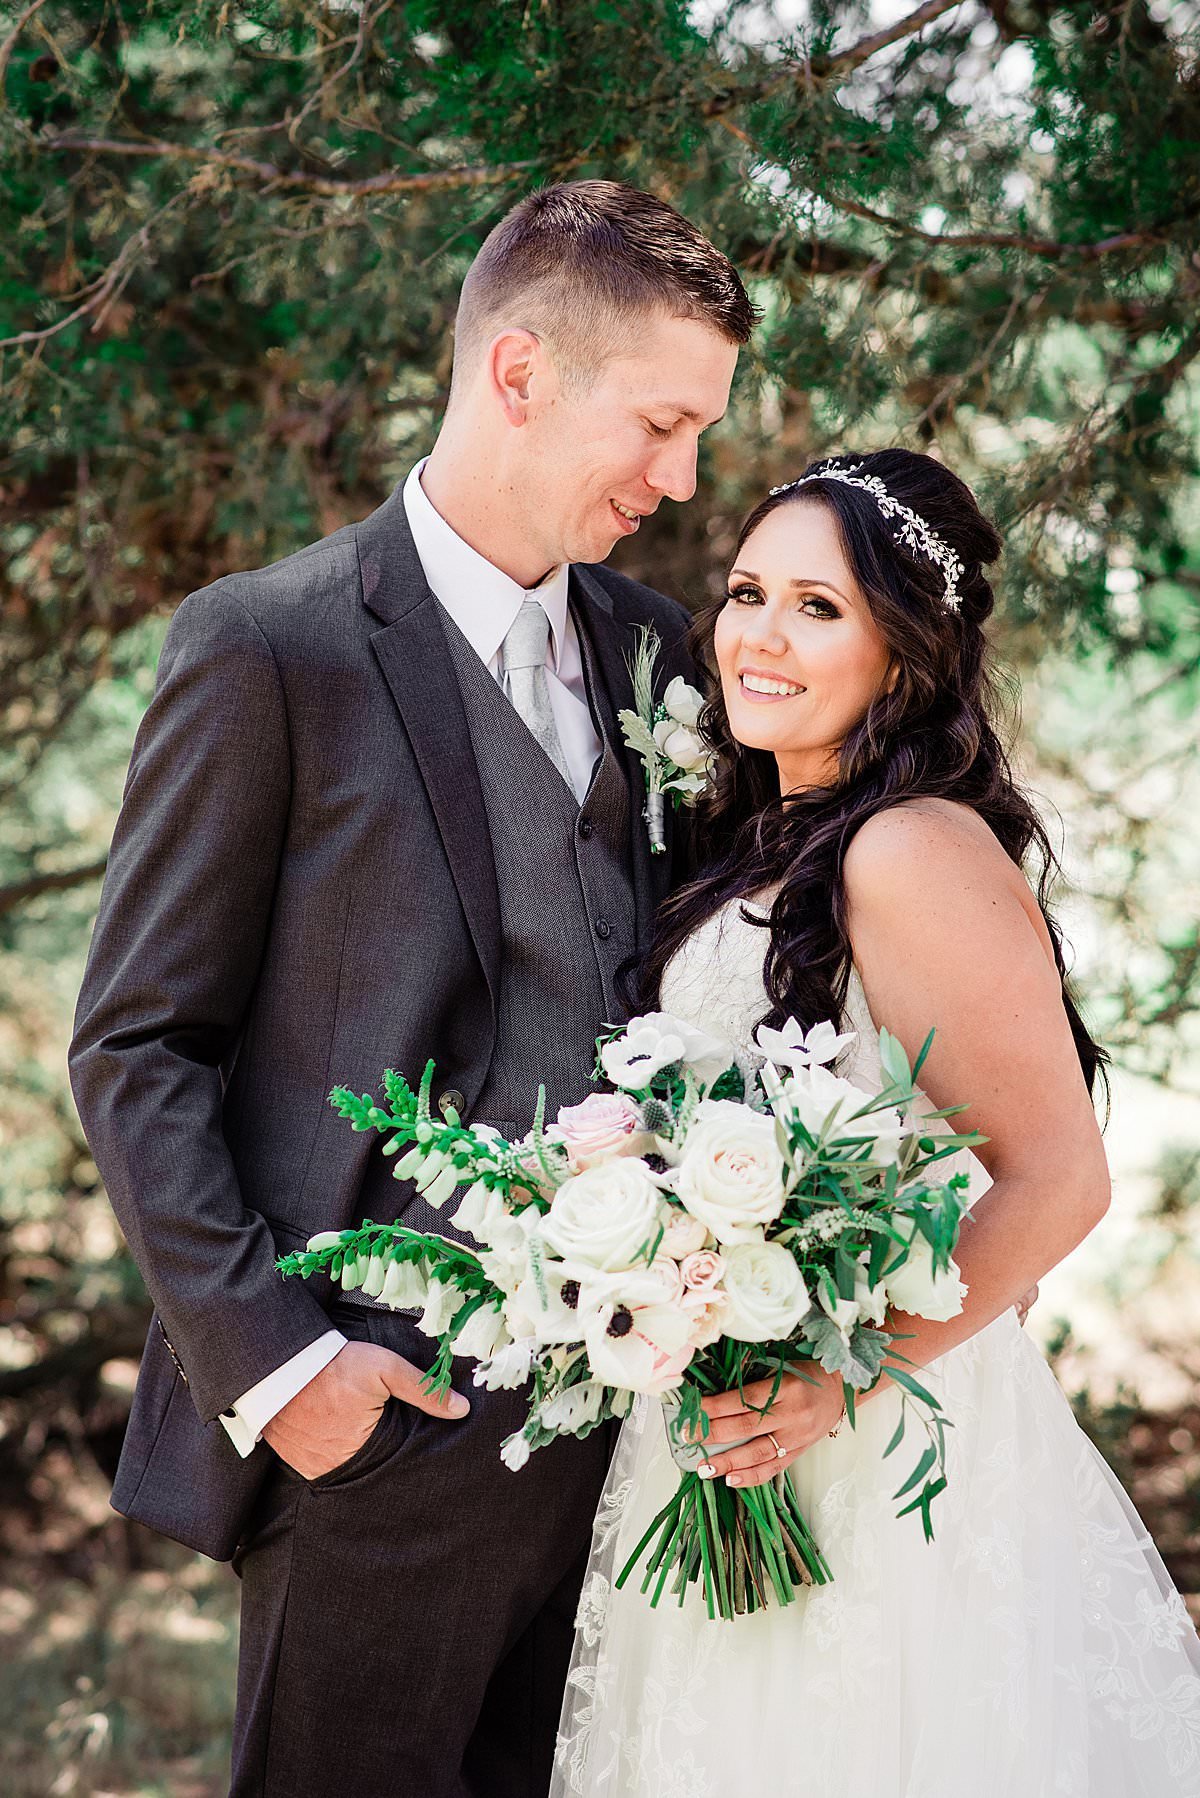 Bride holding a large bouquet with anemones, garden roses and greenery smiling at the camera and her husband is smiling at her